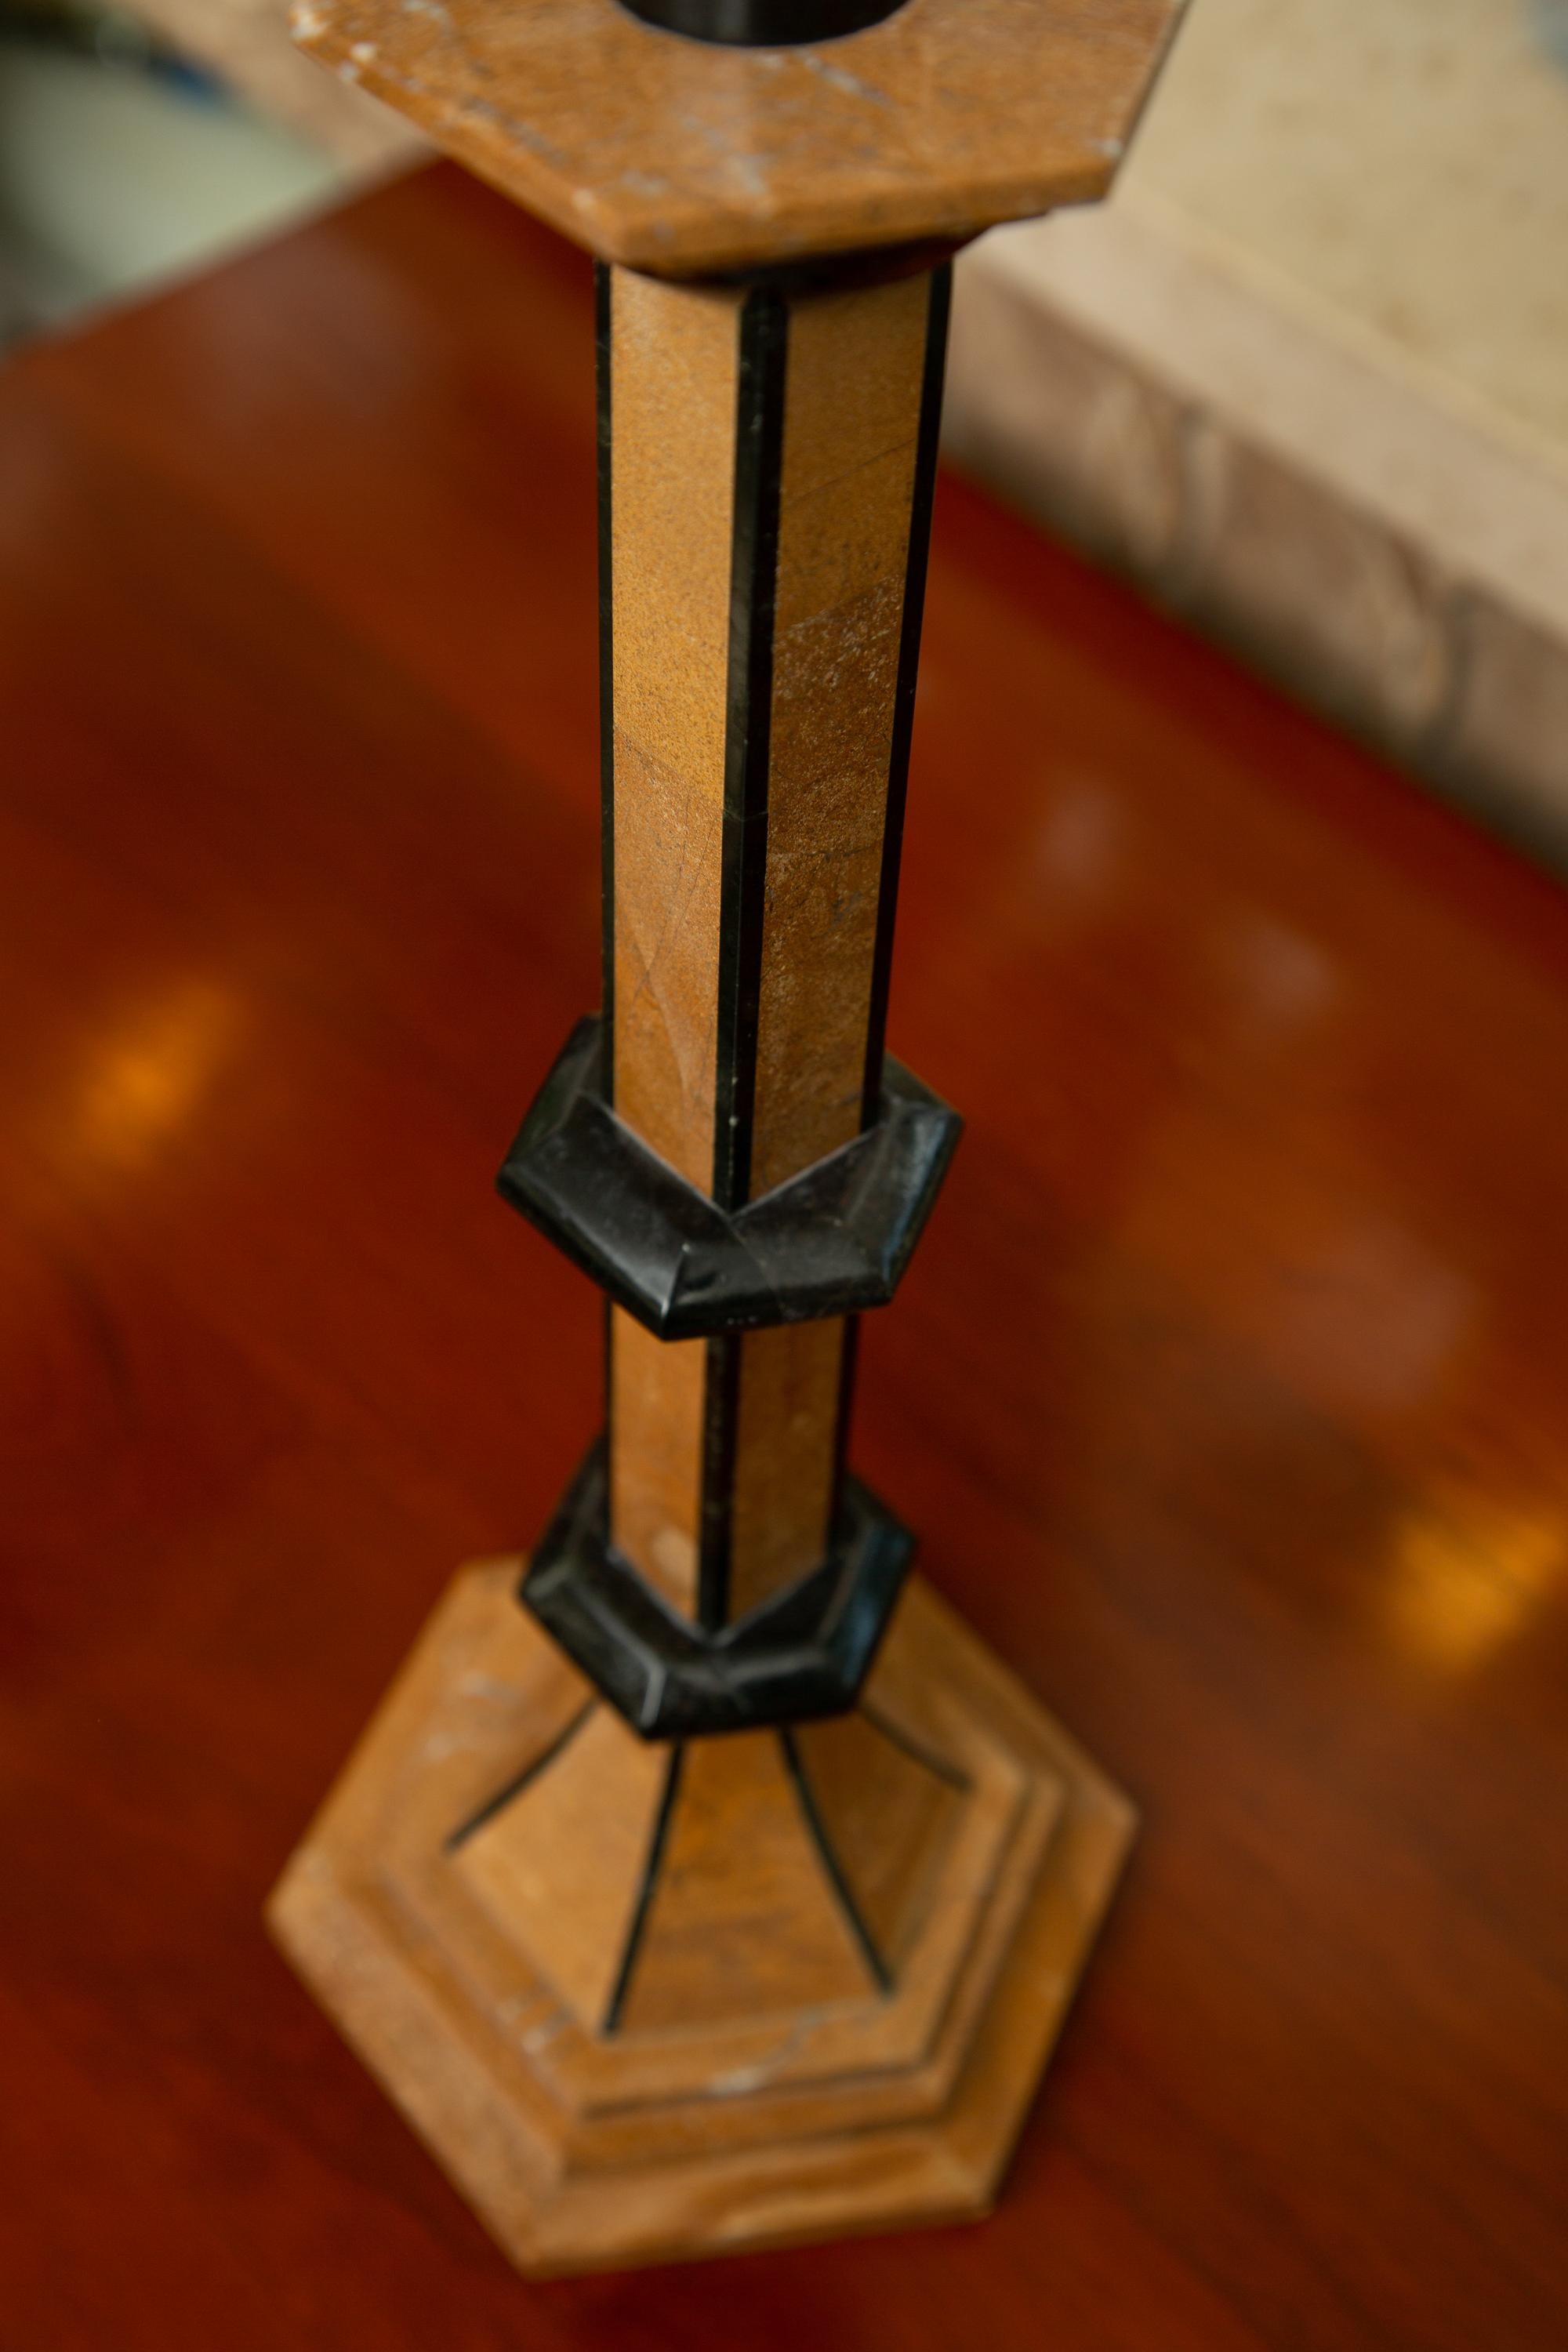 These are an interesting pair of Biedermeier style candlestick holders. They are inlaid with a veneer of stone and are outlined with ebonized decoration, mid-20th century.